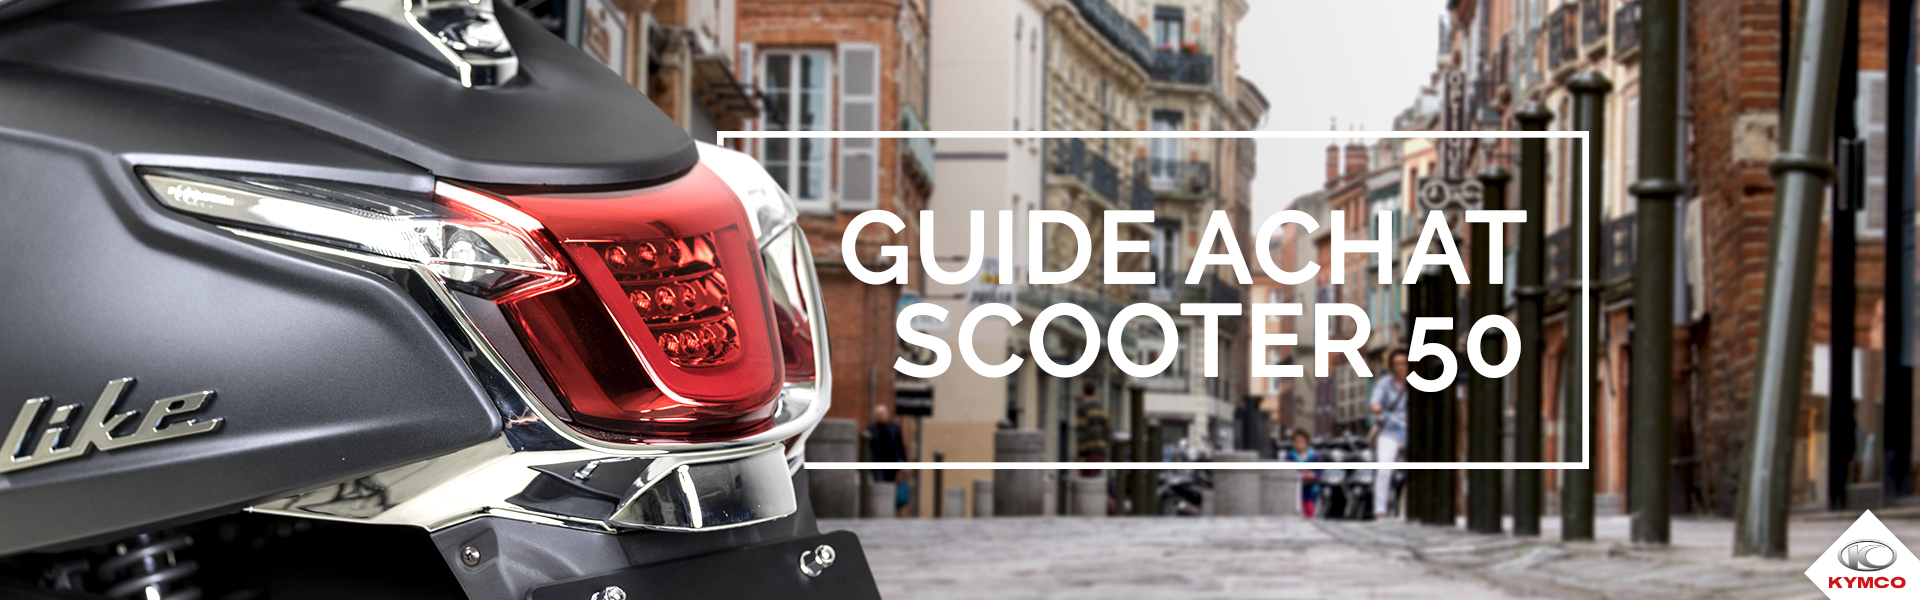 Guide_achat_scooters50